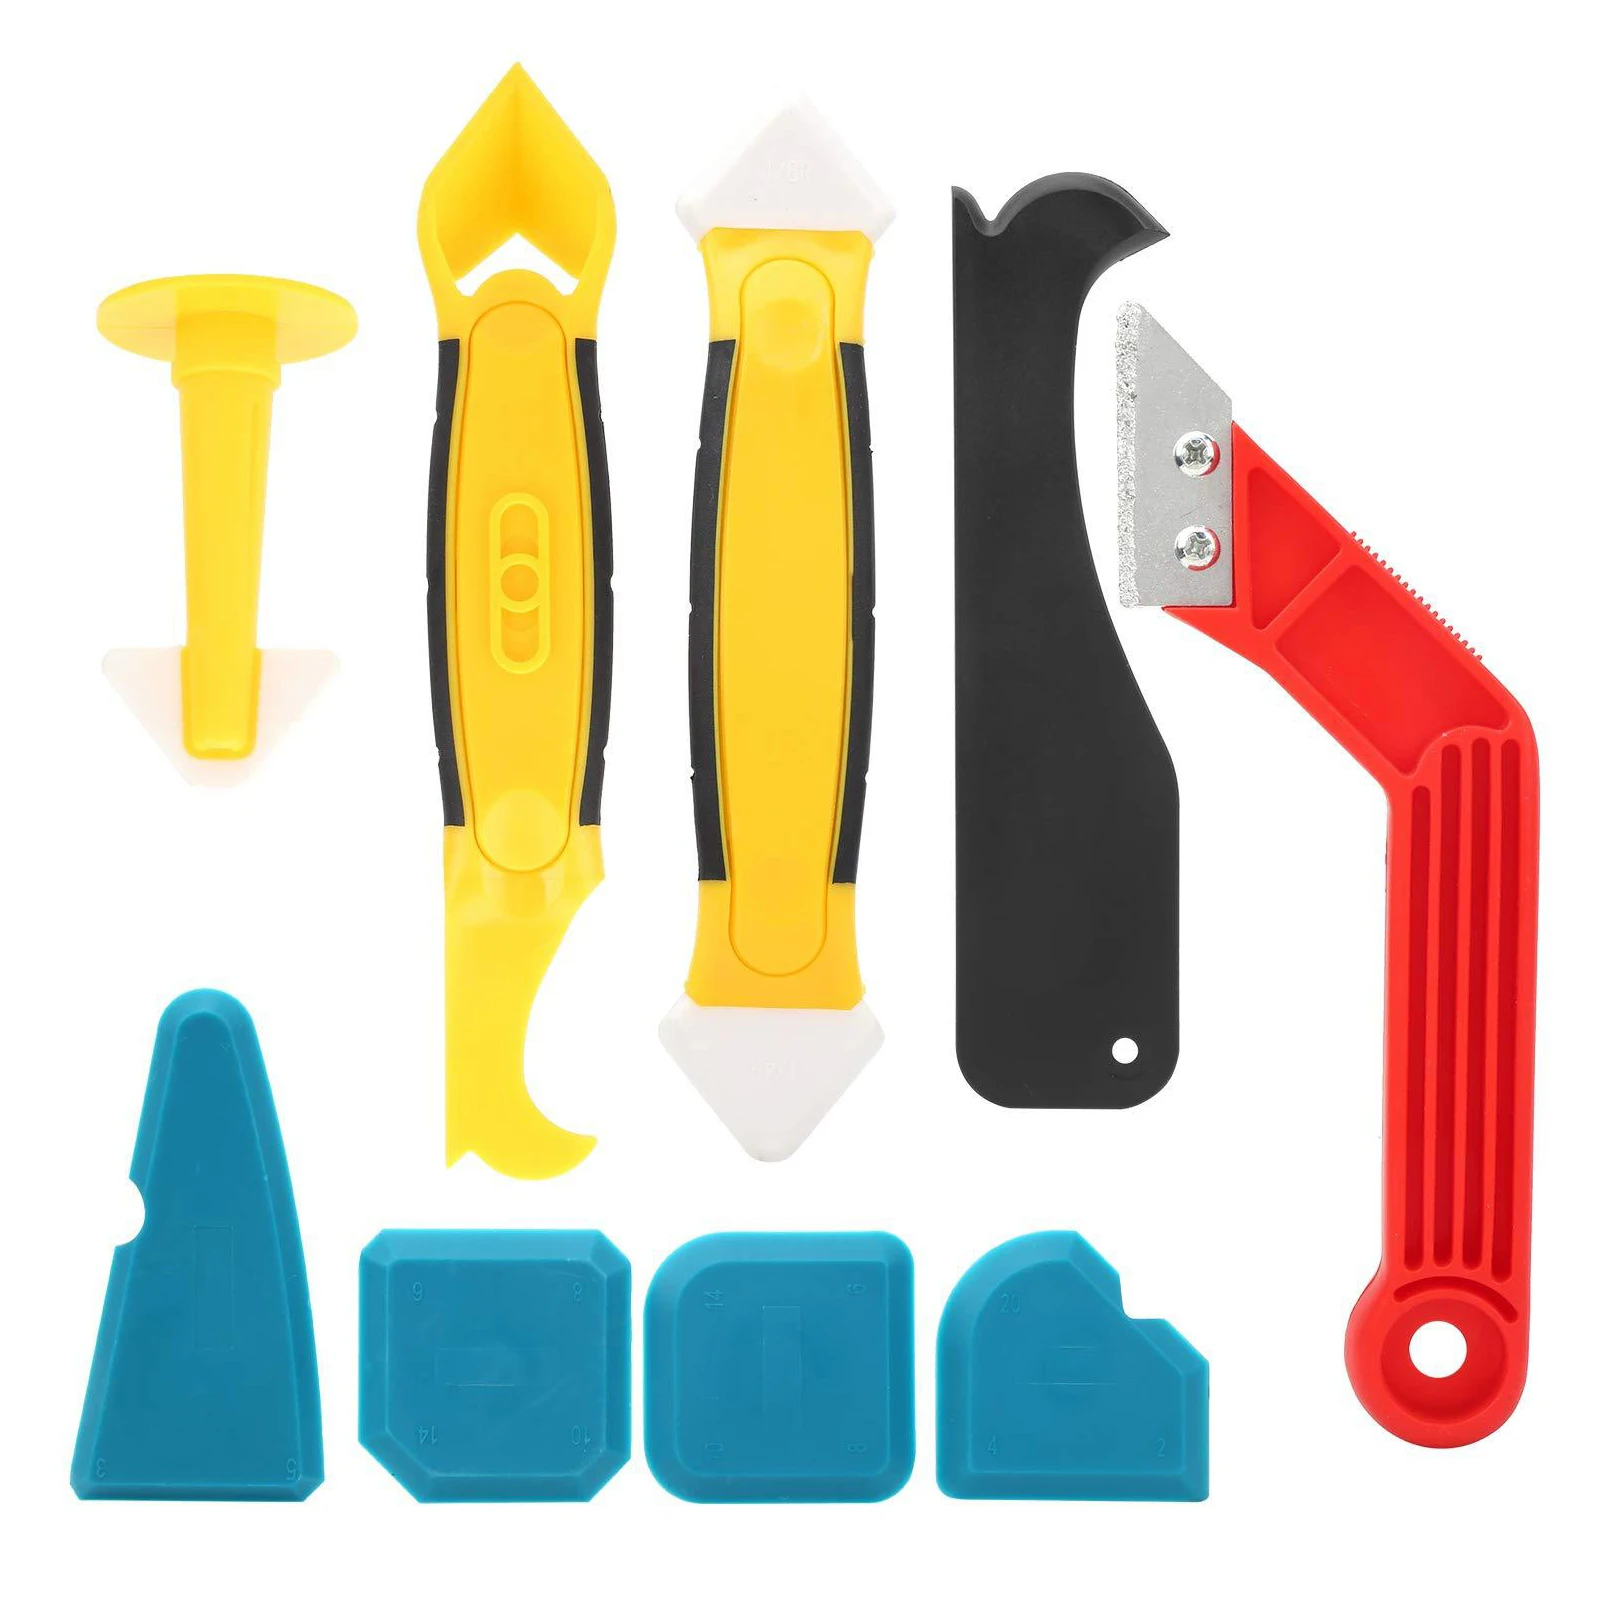 

9pcs Silicone Remover Caulking Tool Kit Smoother Window Bathroom Floor Sealant Finishing Joint Scratch Kitchen Grout Scraper